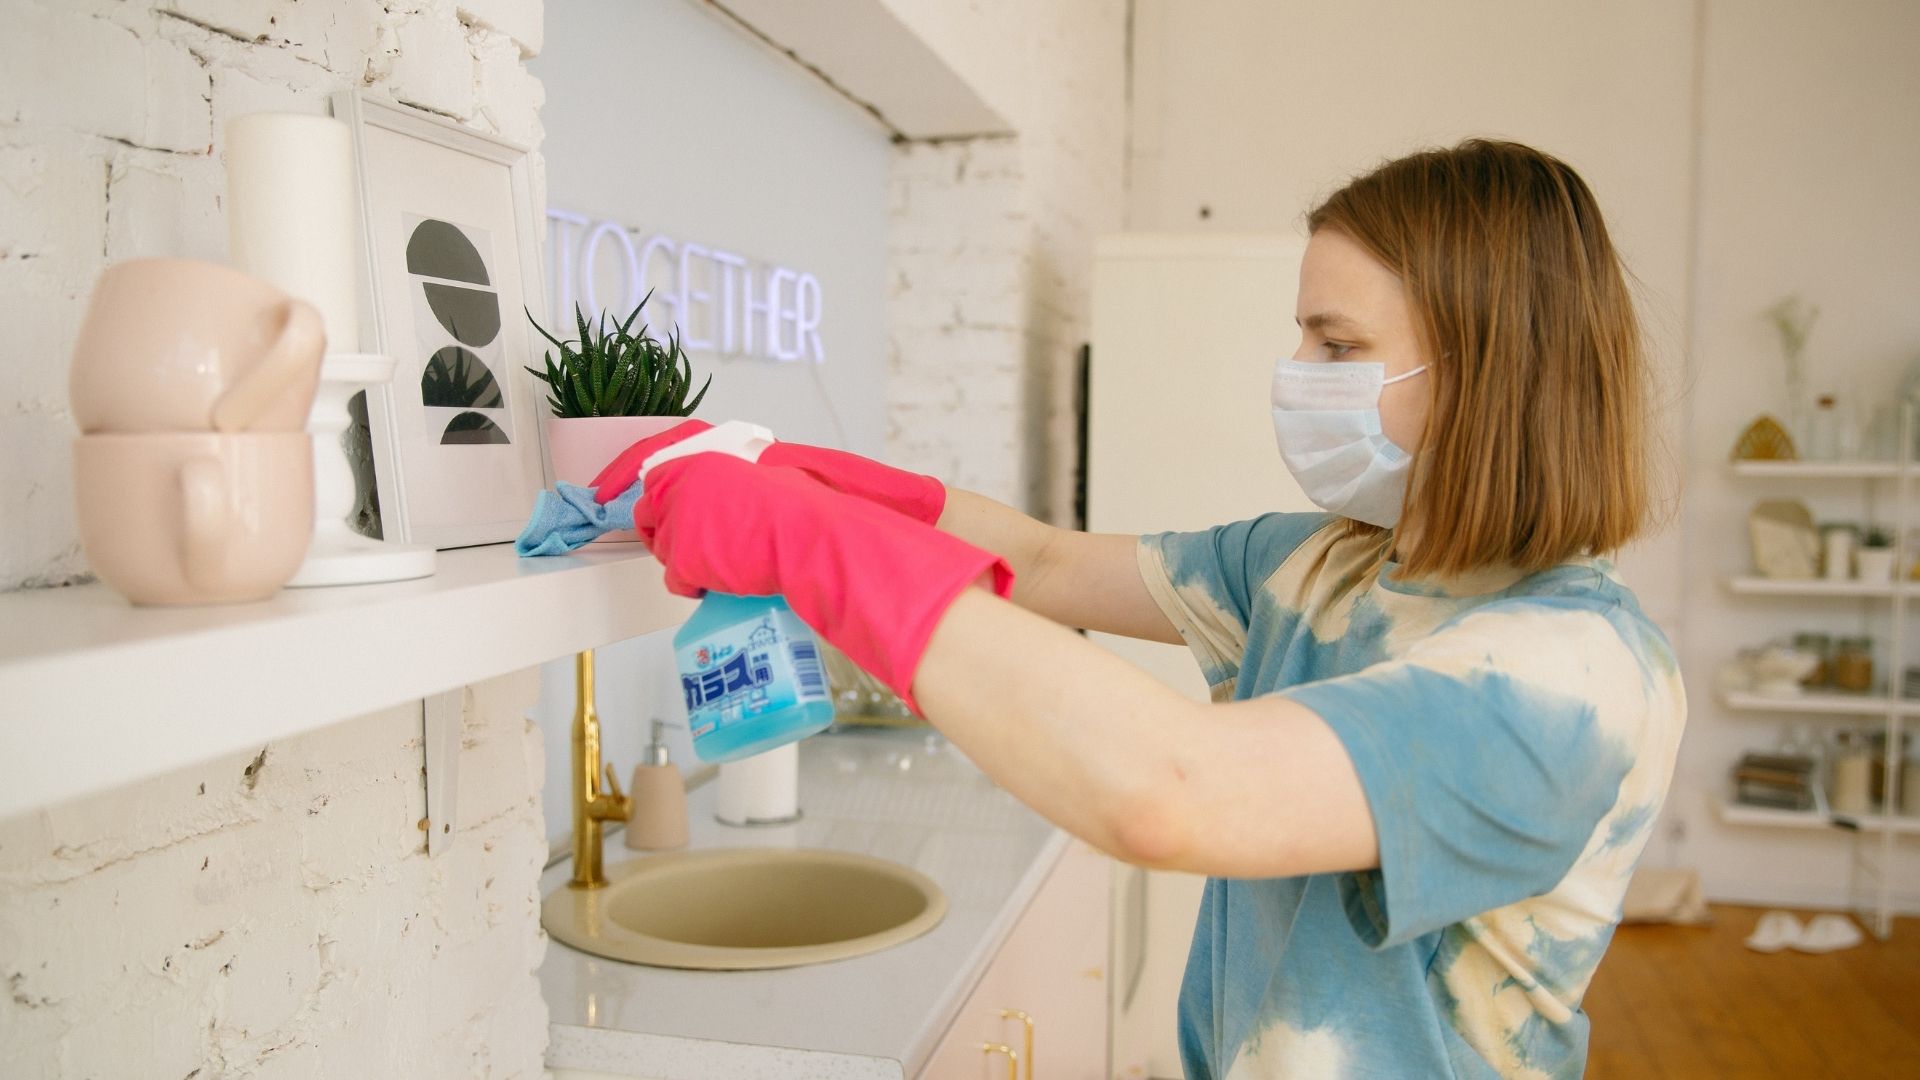 A woman with a blue t-shirt, face mask, and pink gloves, cleaning the surface in the kitchen.